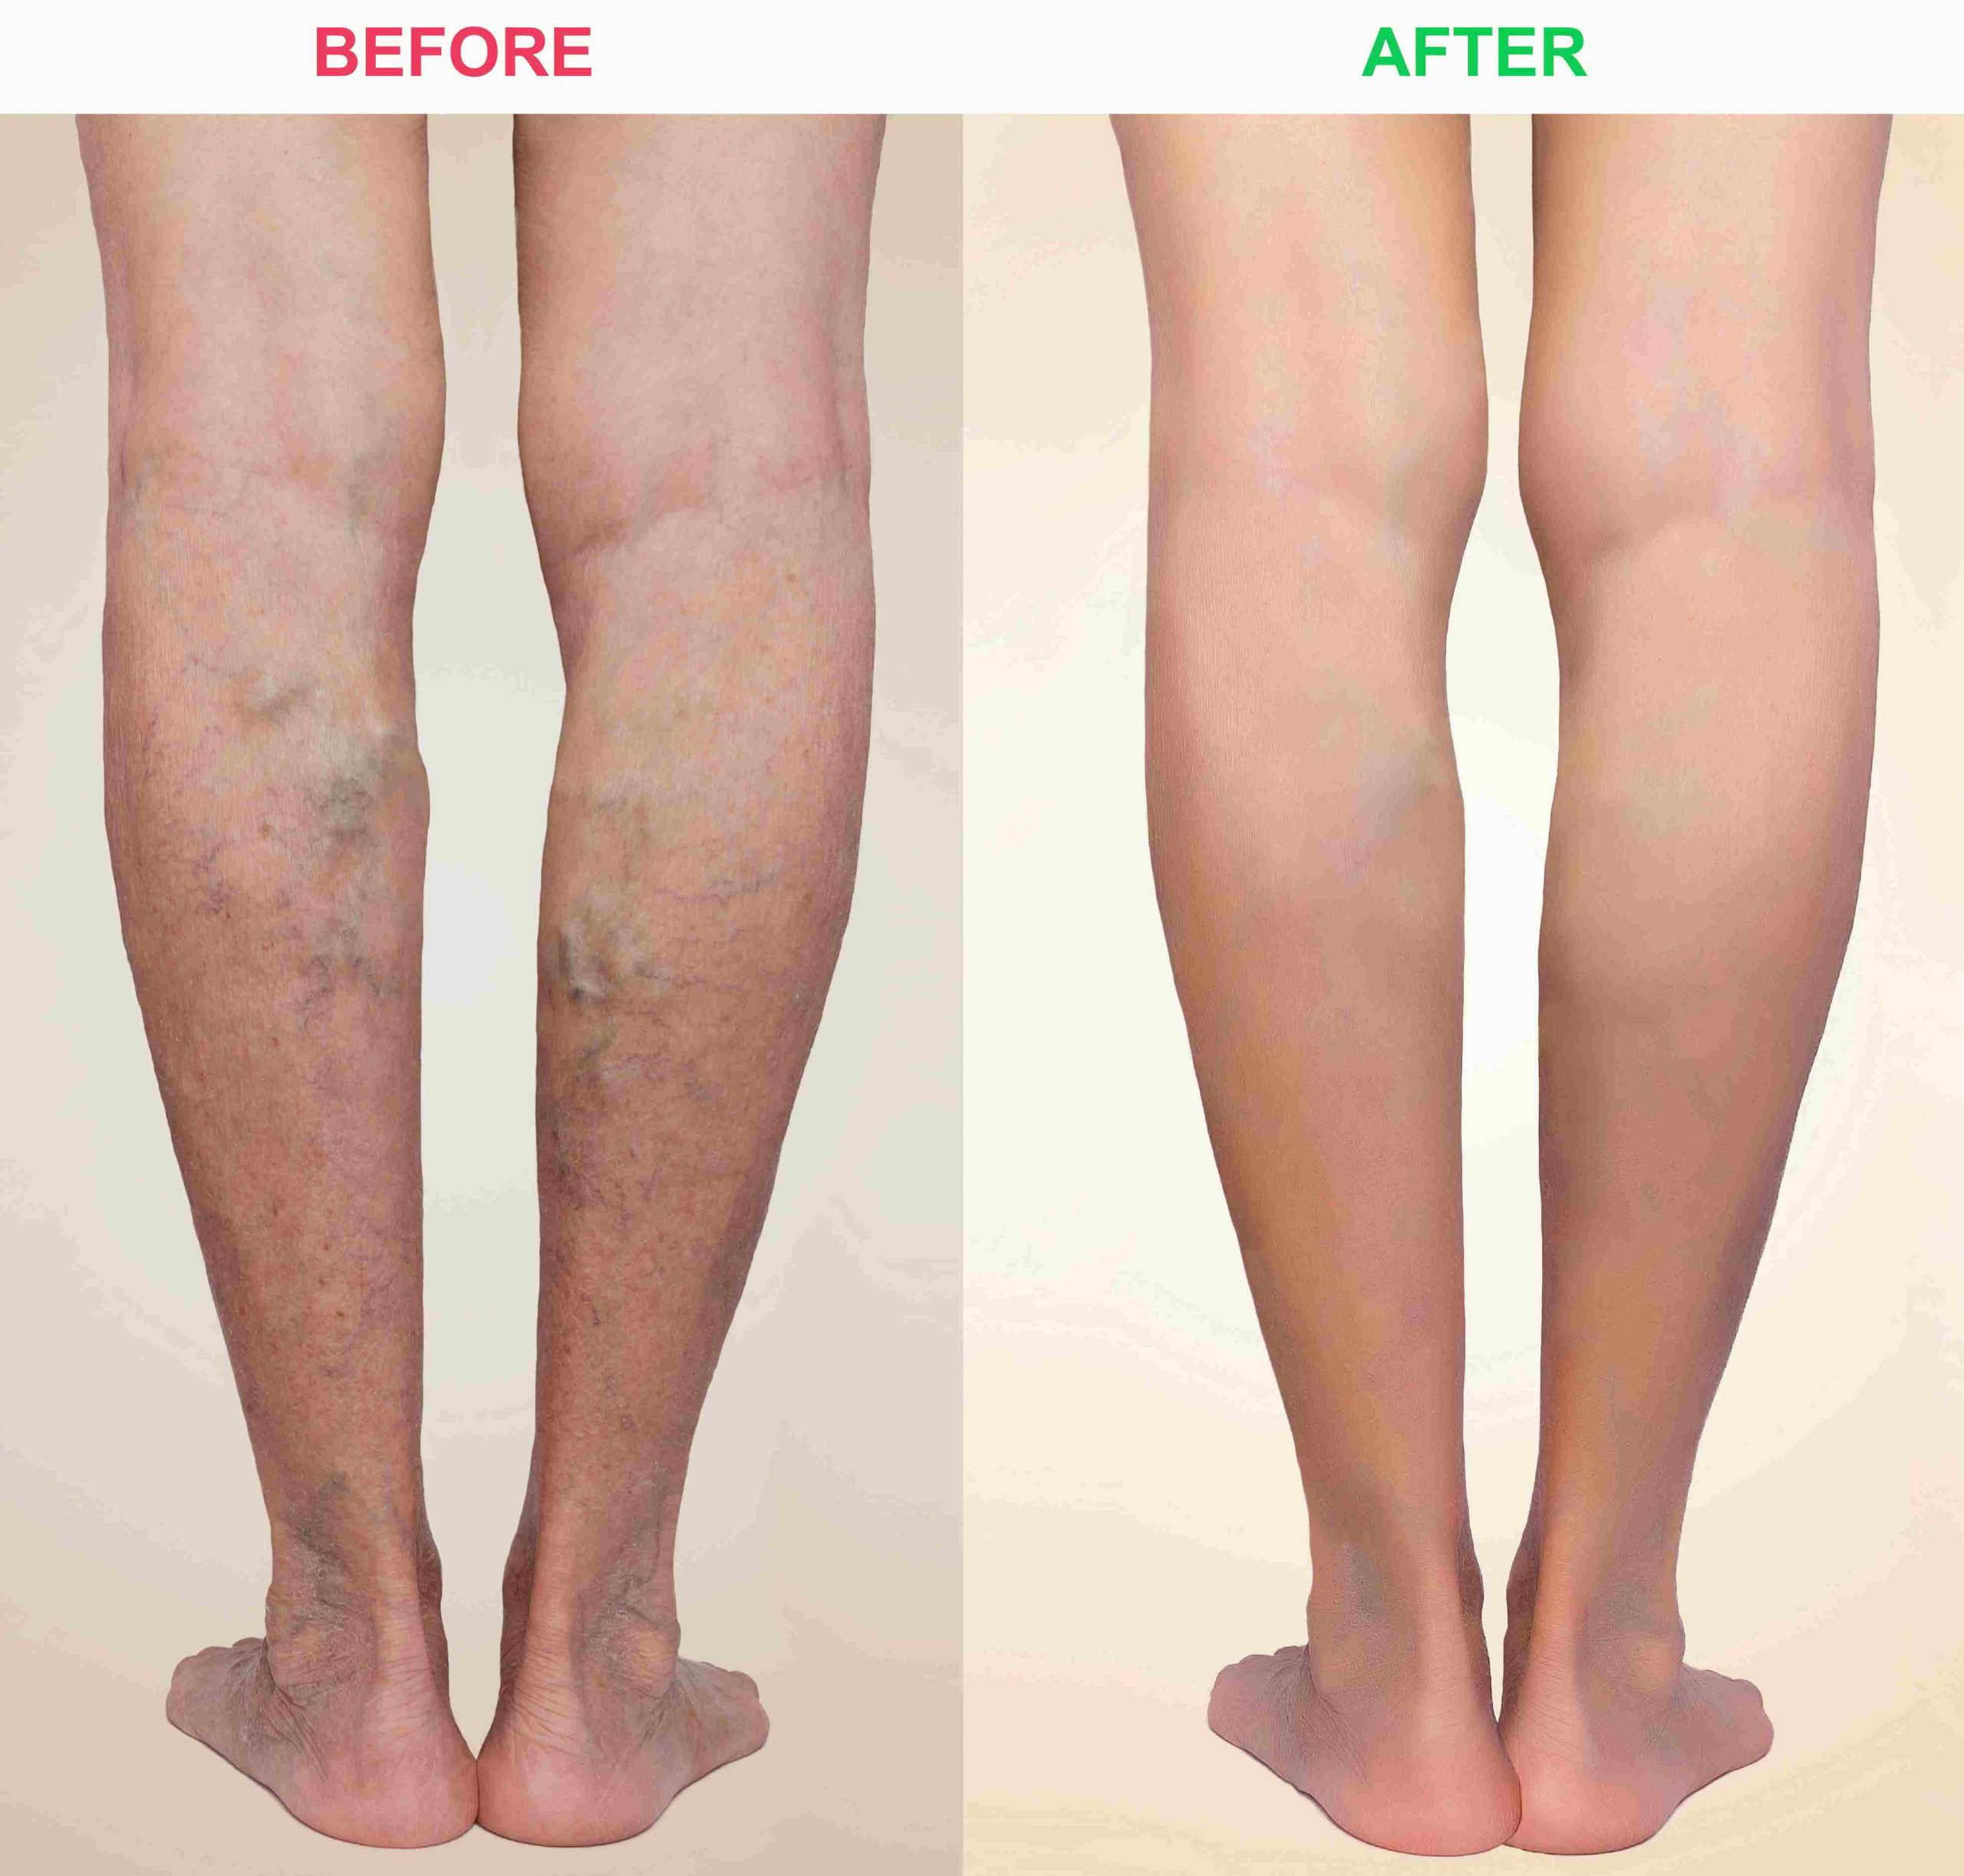 Laser Vein Removal Before and After Photos | Avail Aesthetics in Wake Forest, NC